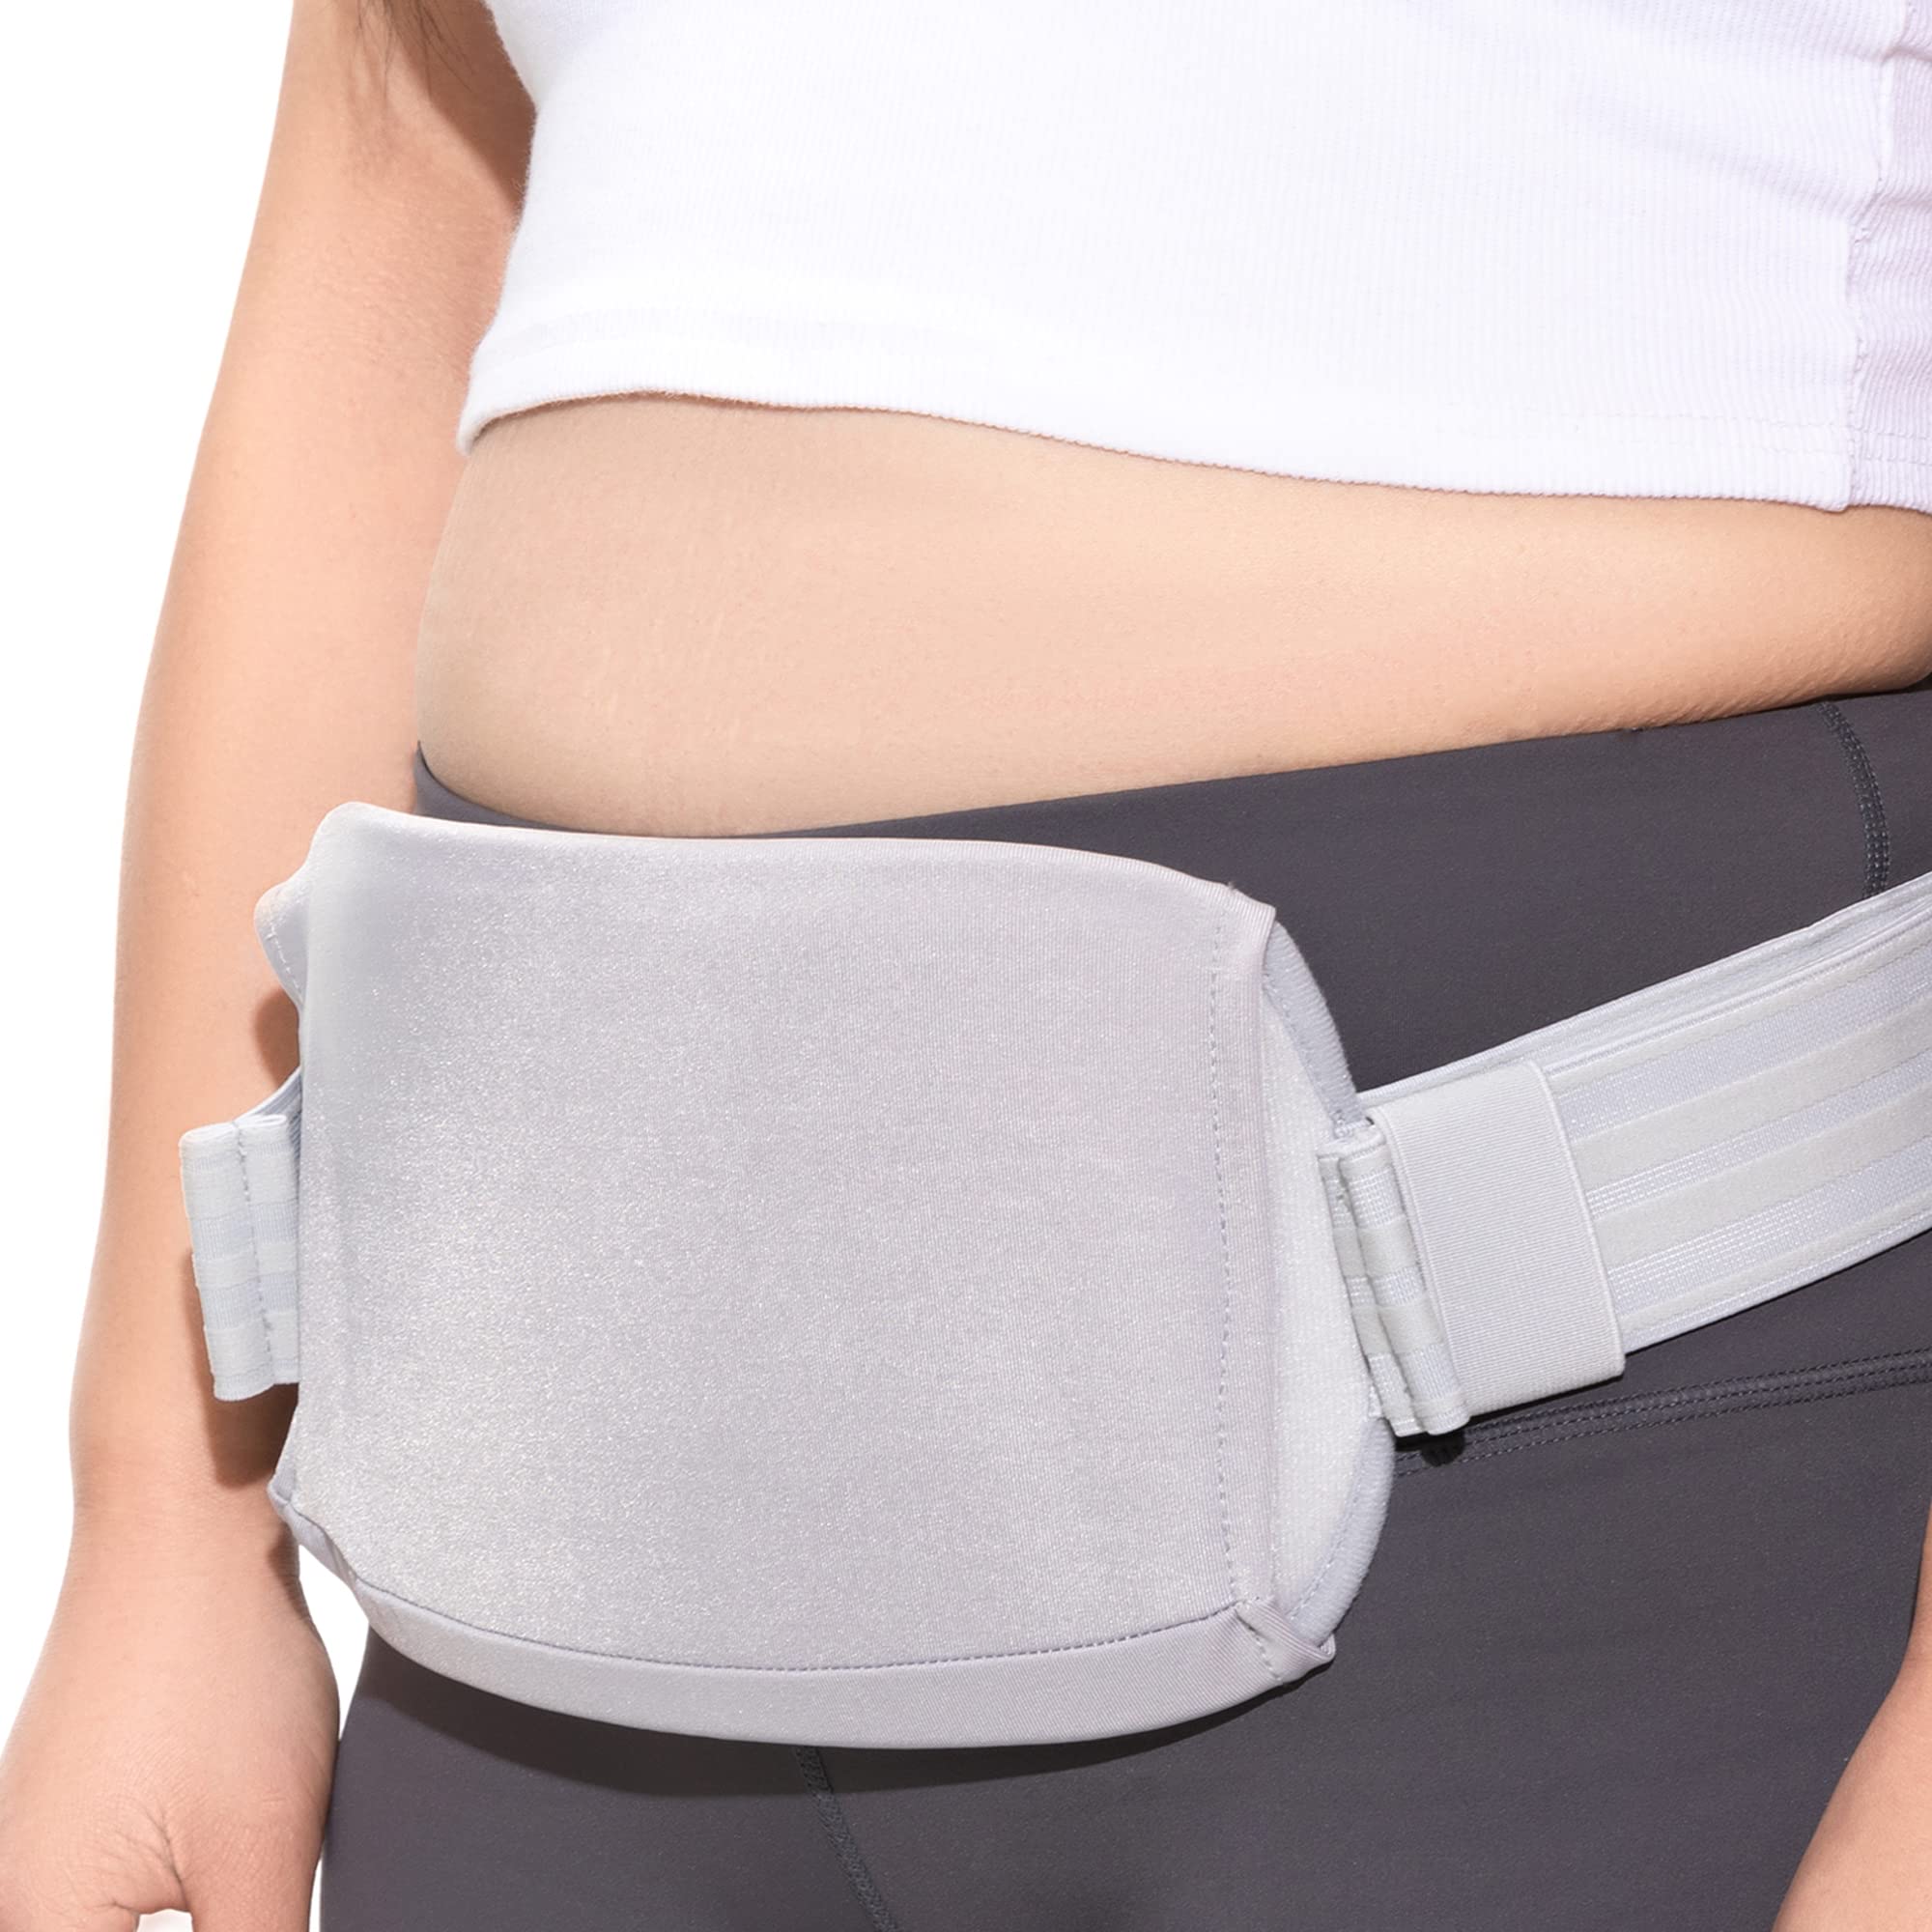 C Section Belly Binder Lumbar Support Belt Uterus Warming Belt Small  Abdominal Protection Belt for C-Section Postpartum Recovery after  Hysterectomy PMS Hernia Appendectomy